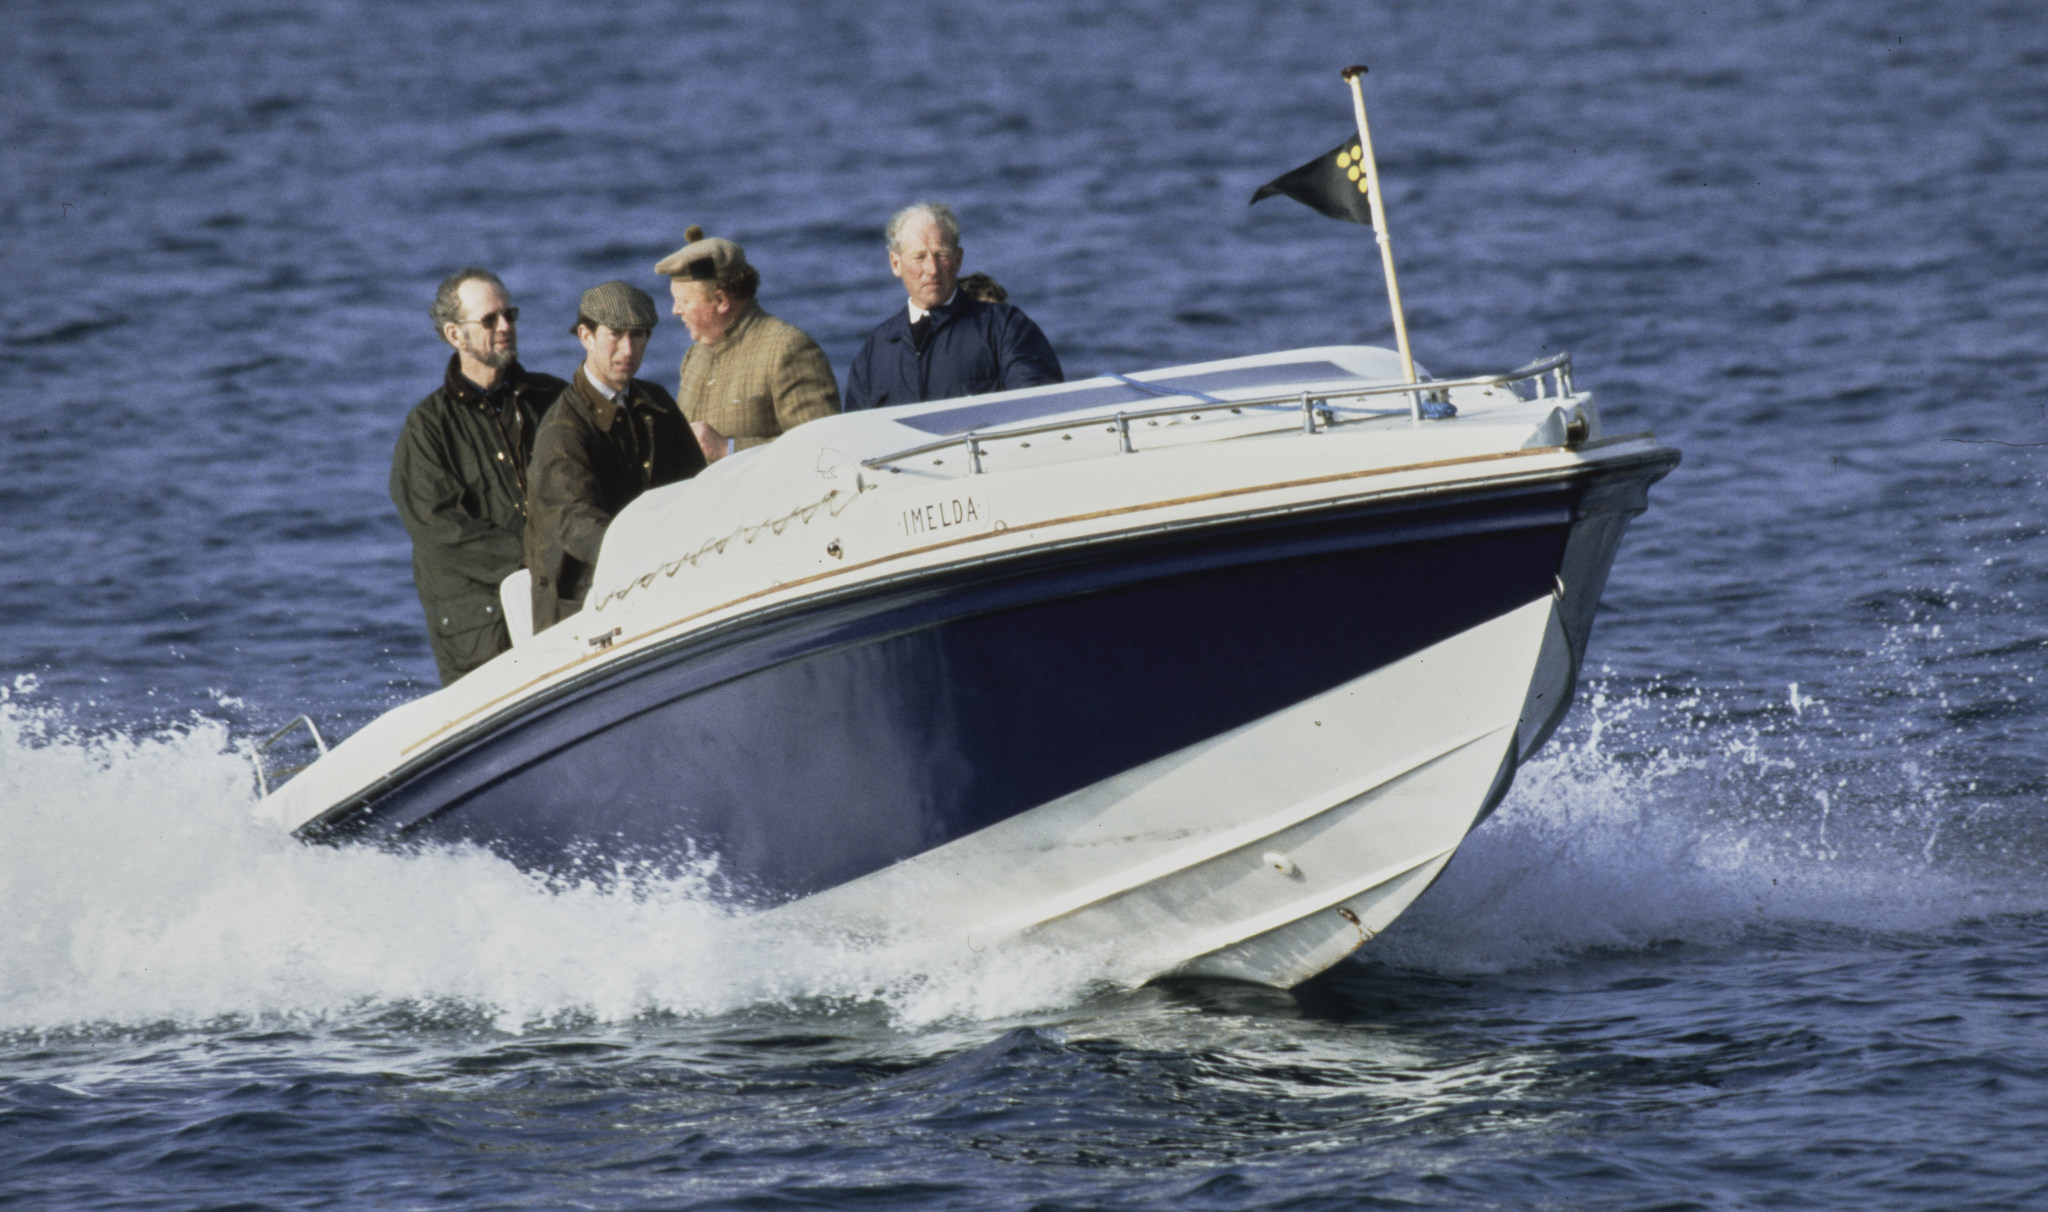 Prince Charles rides a speedboat given to him by Imelda Marcos. (Photo: Tim Graham via Getty)